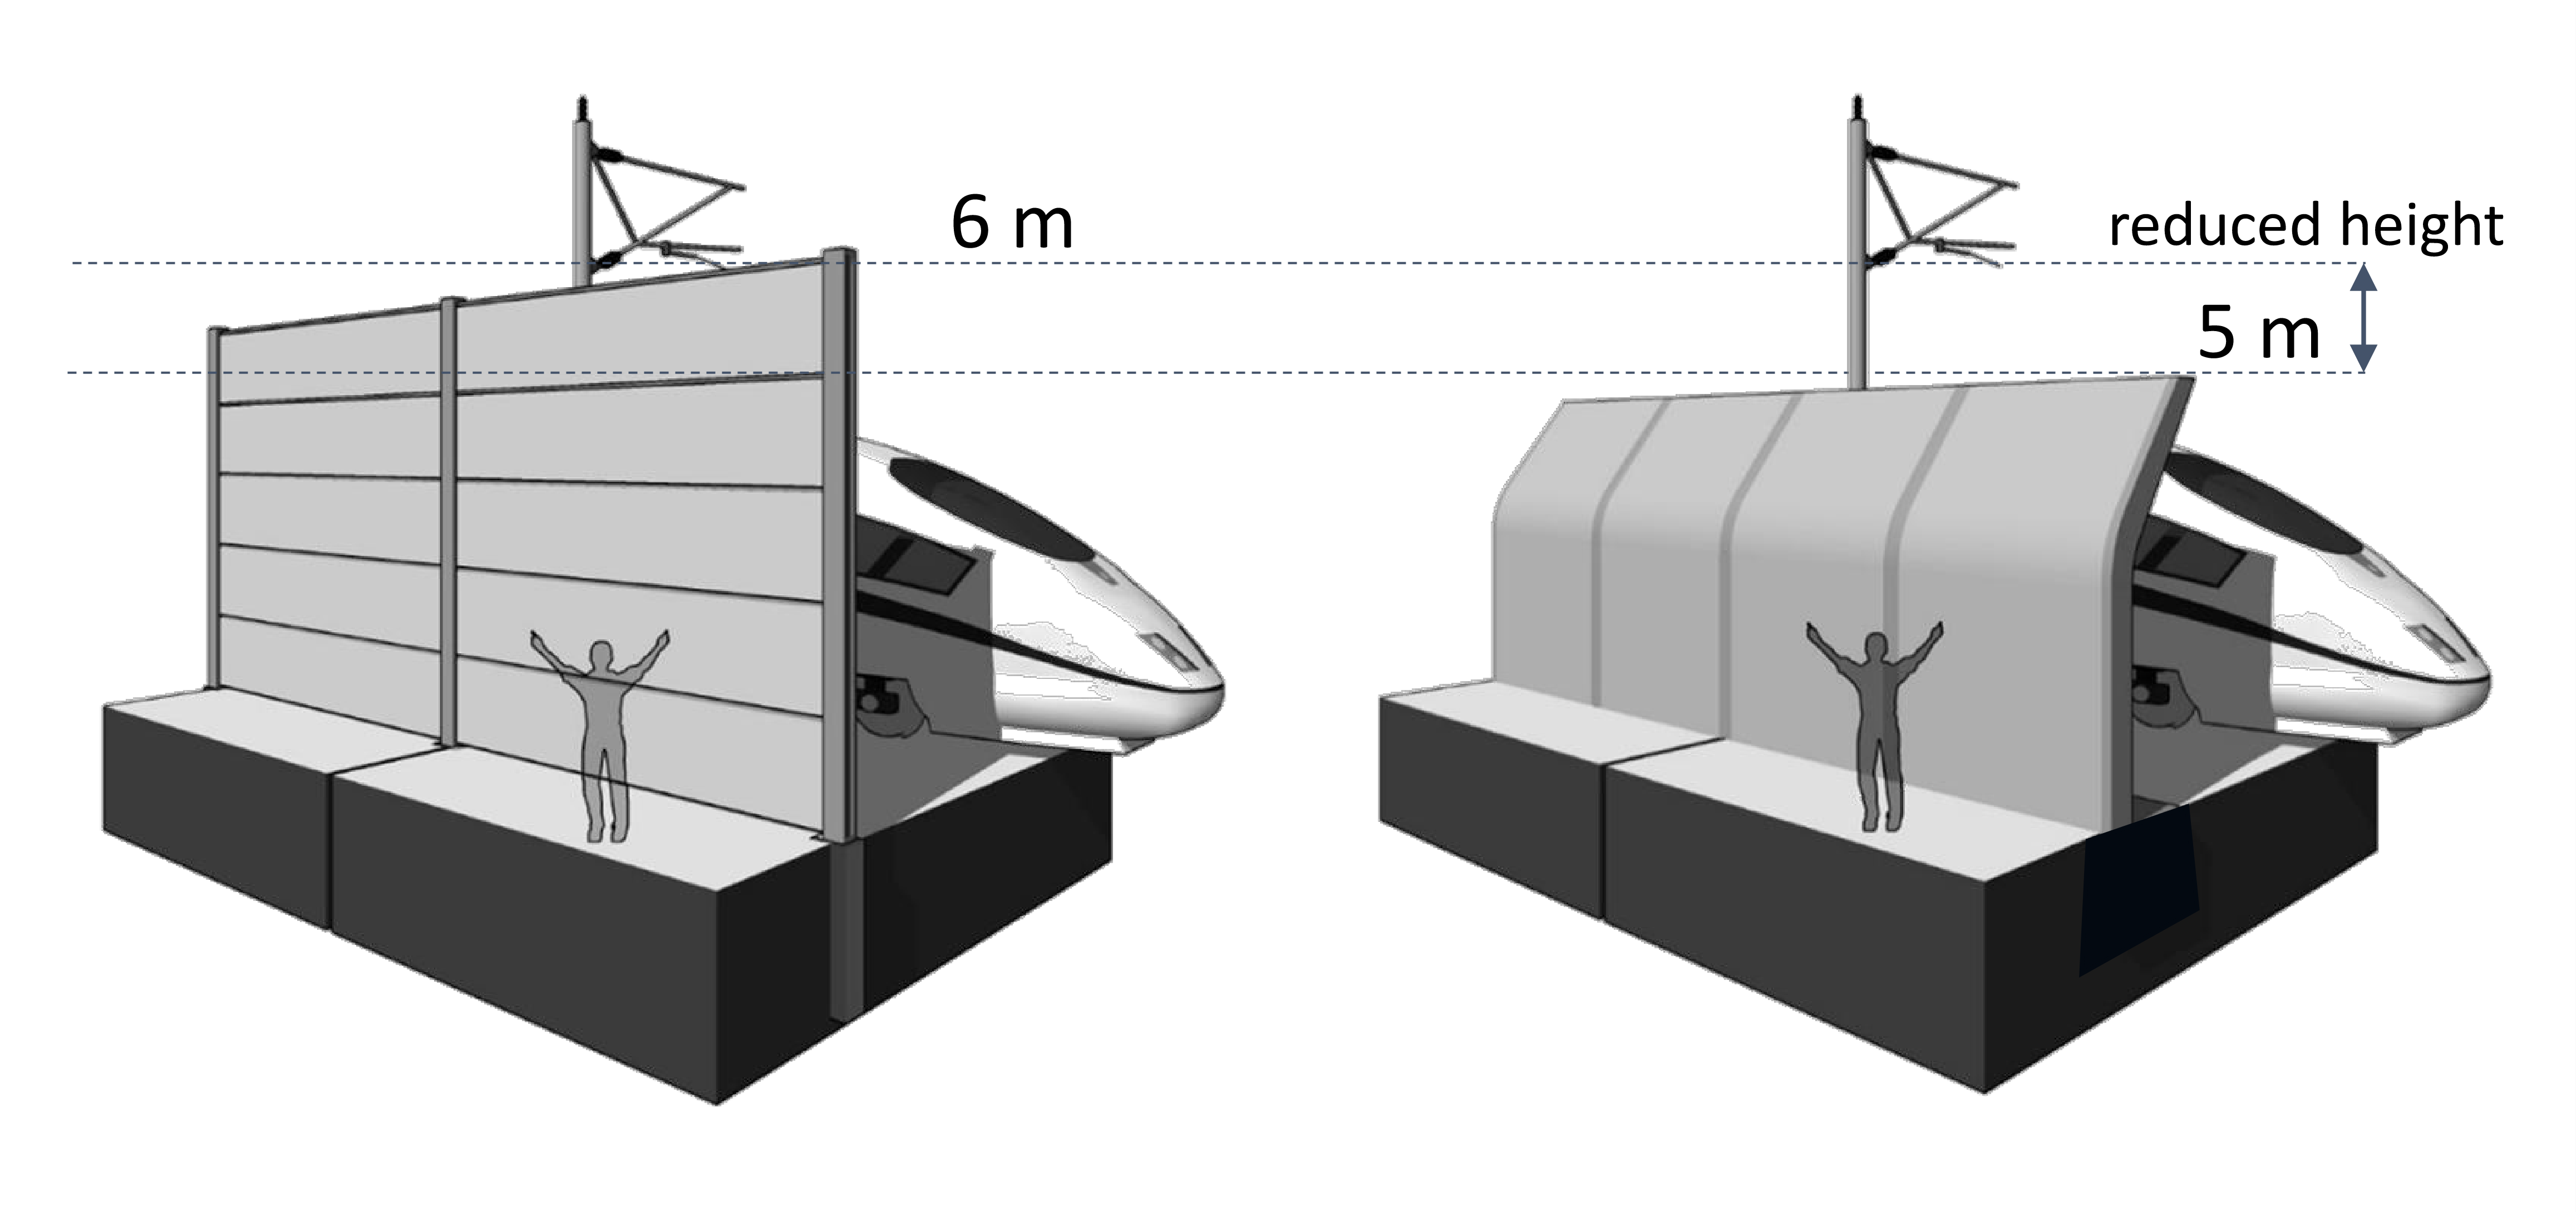 Diagram showing the aesthetic benefits of the possible height reduction due to the crank